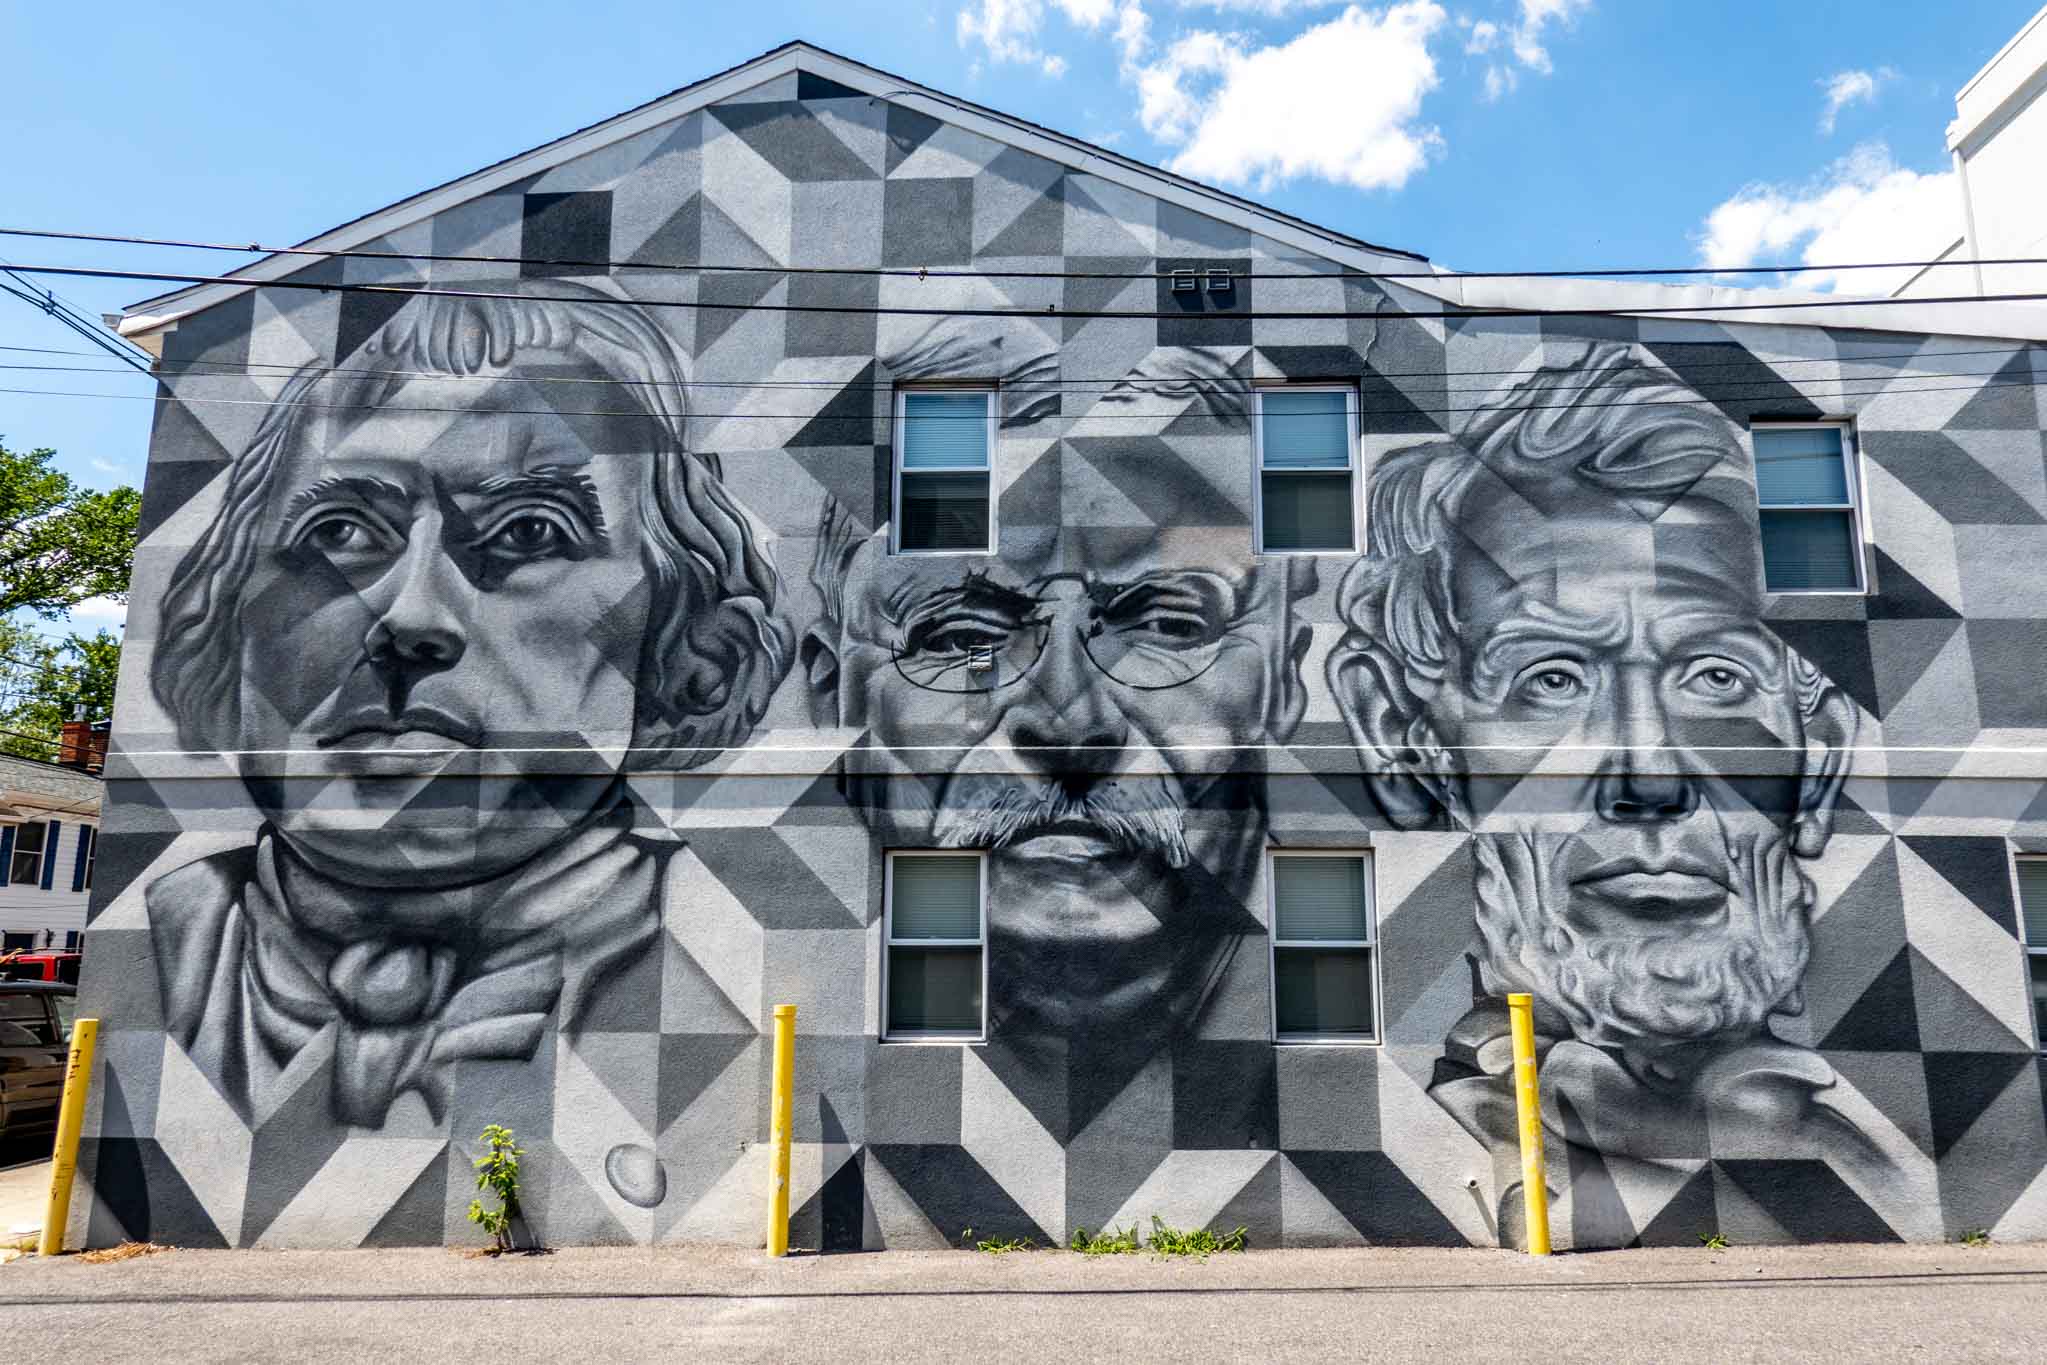 Black, white, and gray street art mural featuring the faces of three men--Abraham Lincoln, Teddy Roosevelt, and James Madison